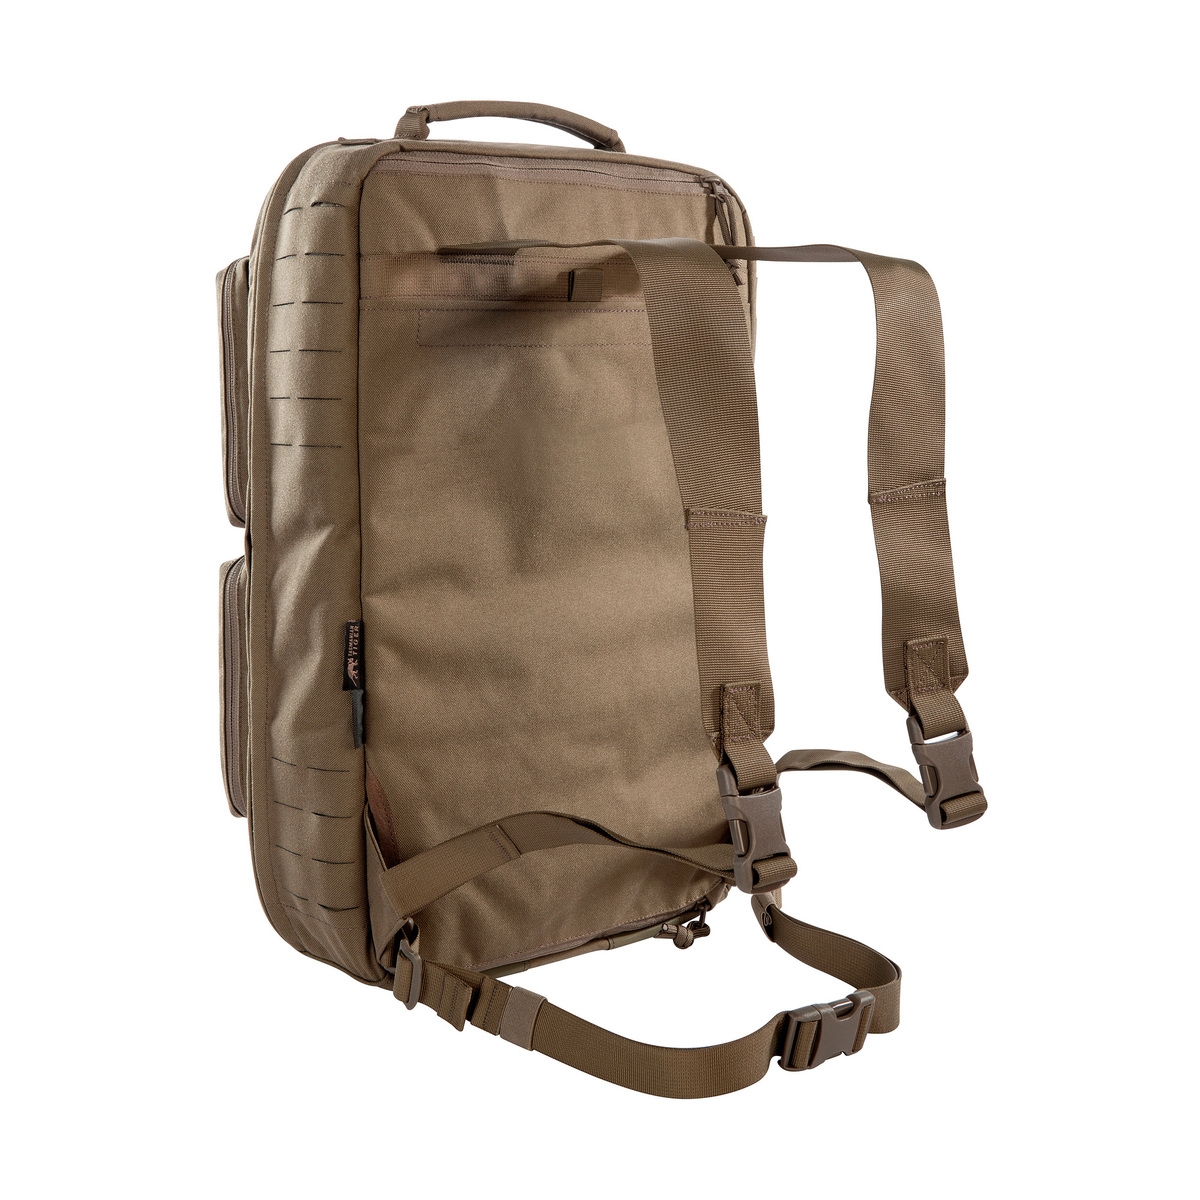 Medic Mascal Pack Coyote brown, One Size